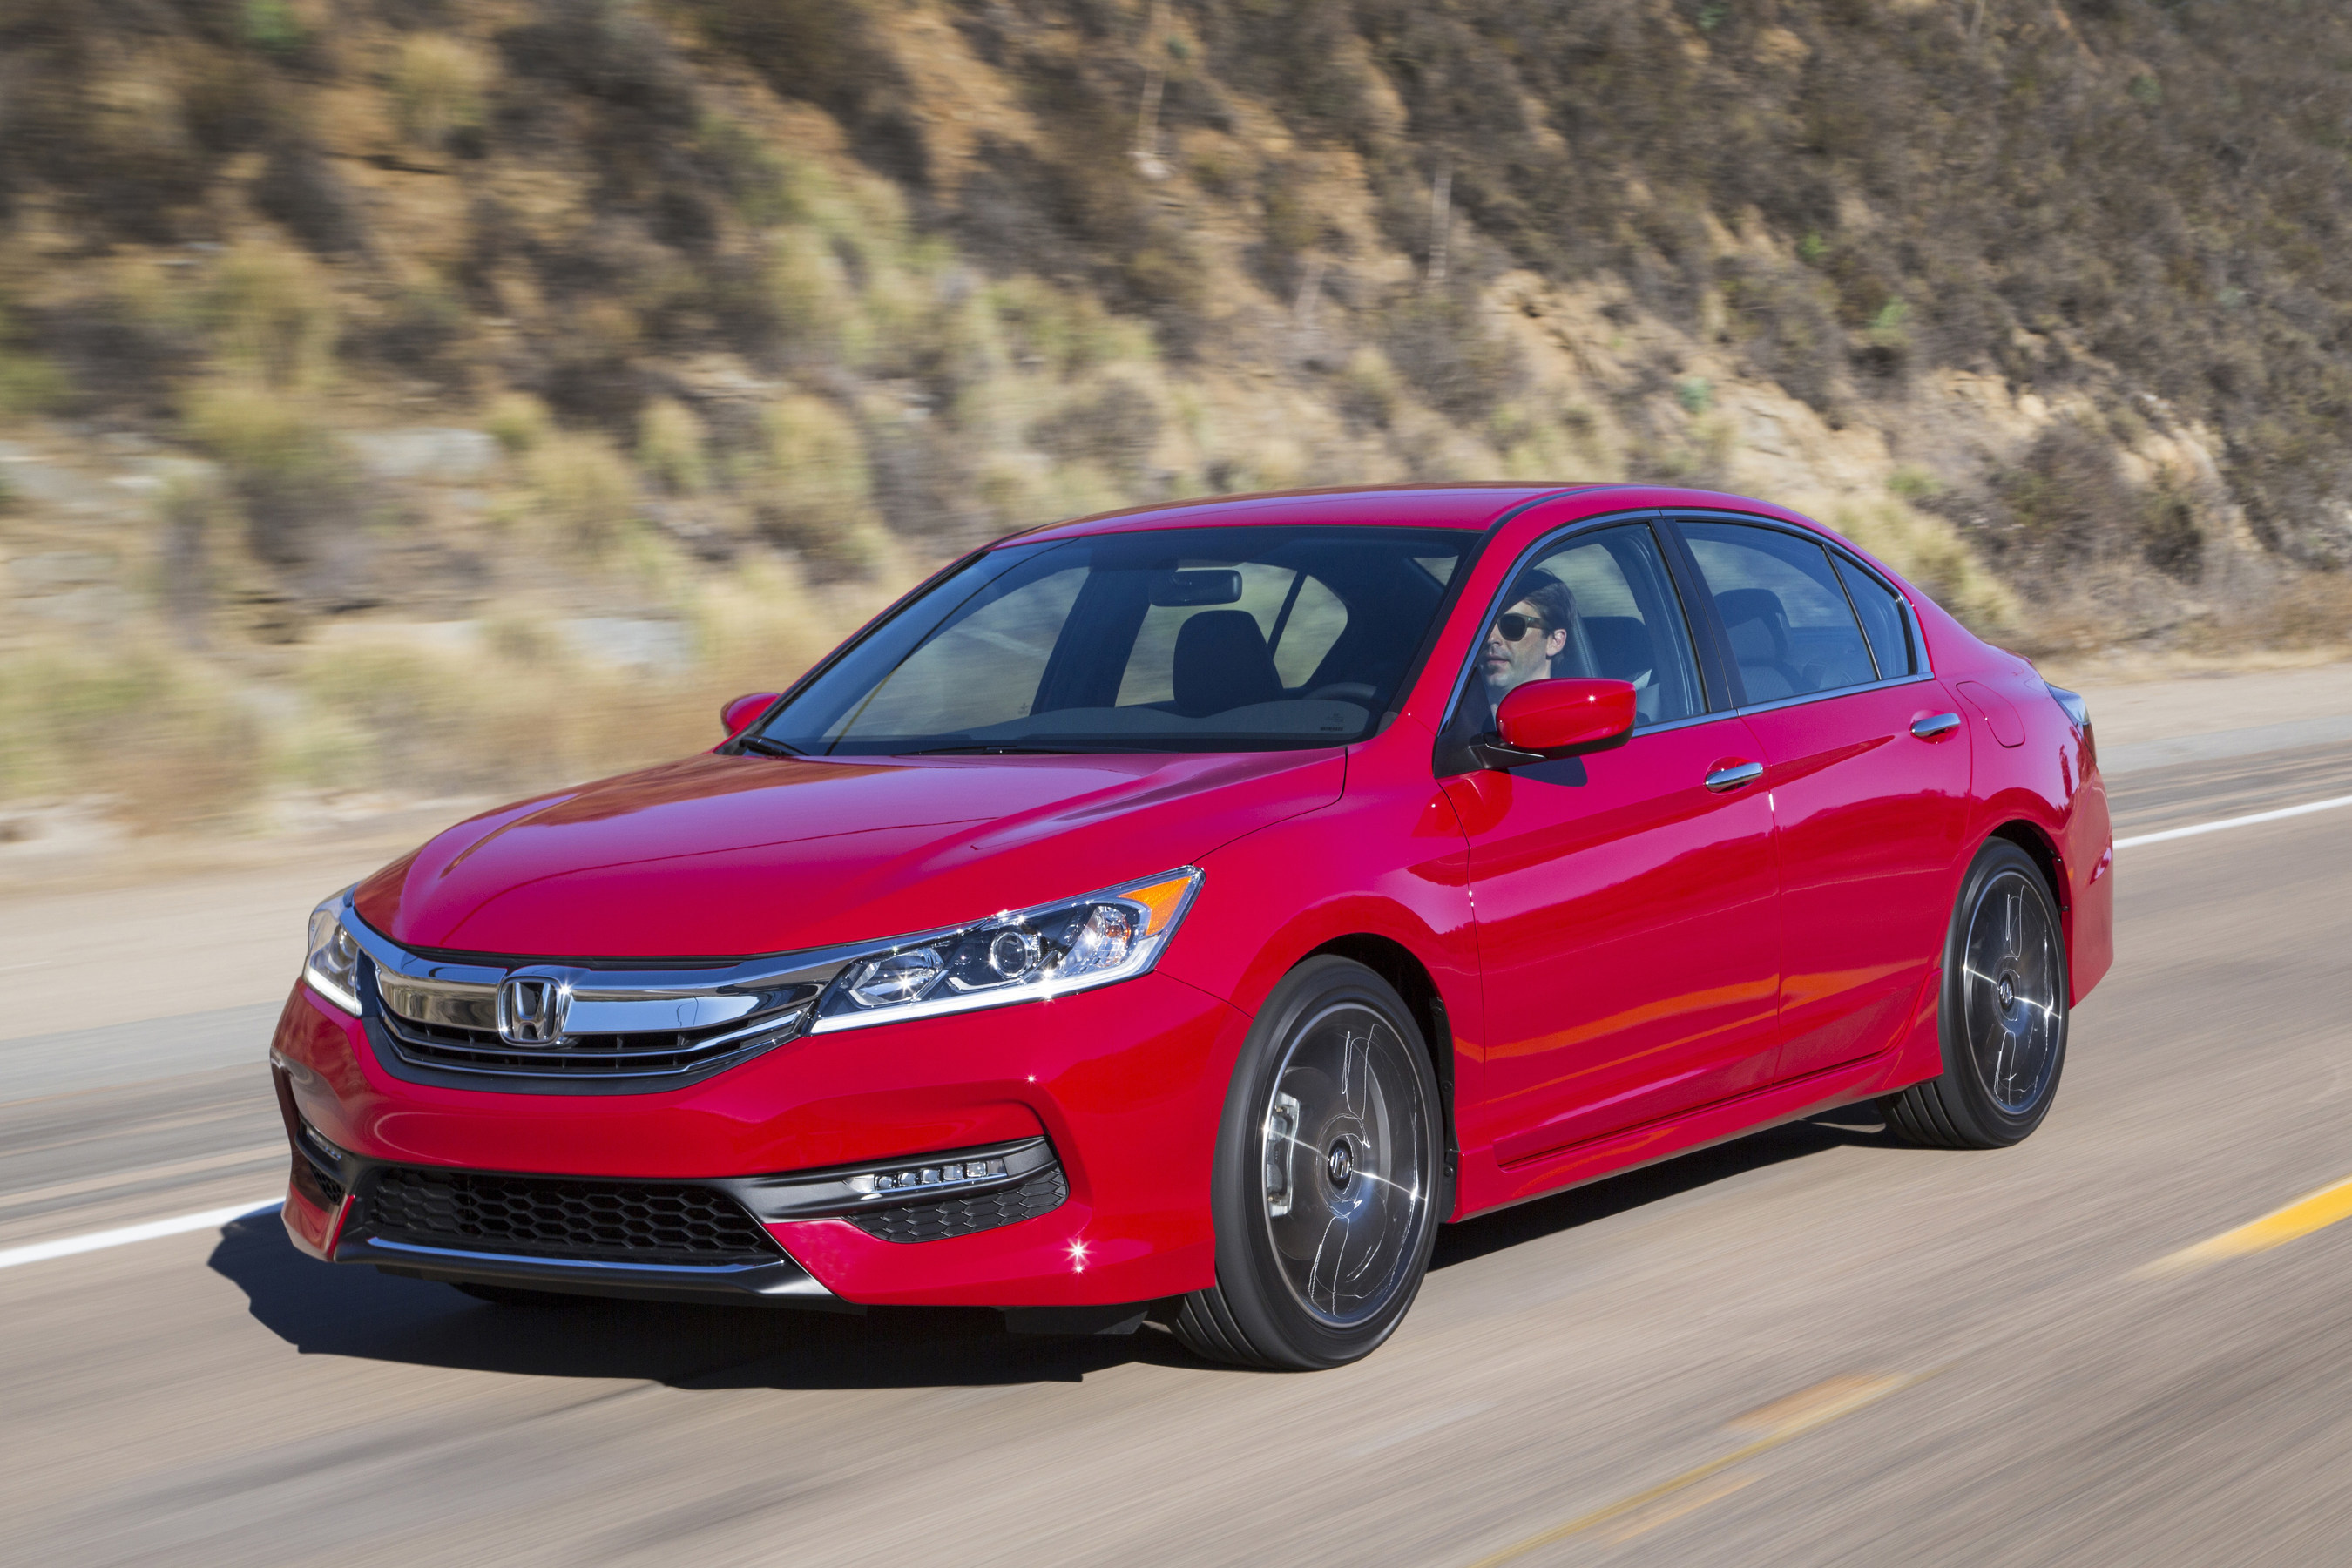 The 2017 Honda Accord arrives in showrooms Monday, June 27 with a New Sport Special Edition and the basic style, features, performance and value that helped make it the most popular car in America among individual retail buyers the last three years in a row.